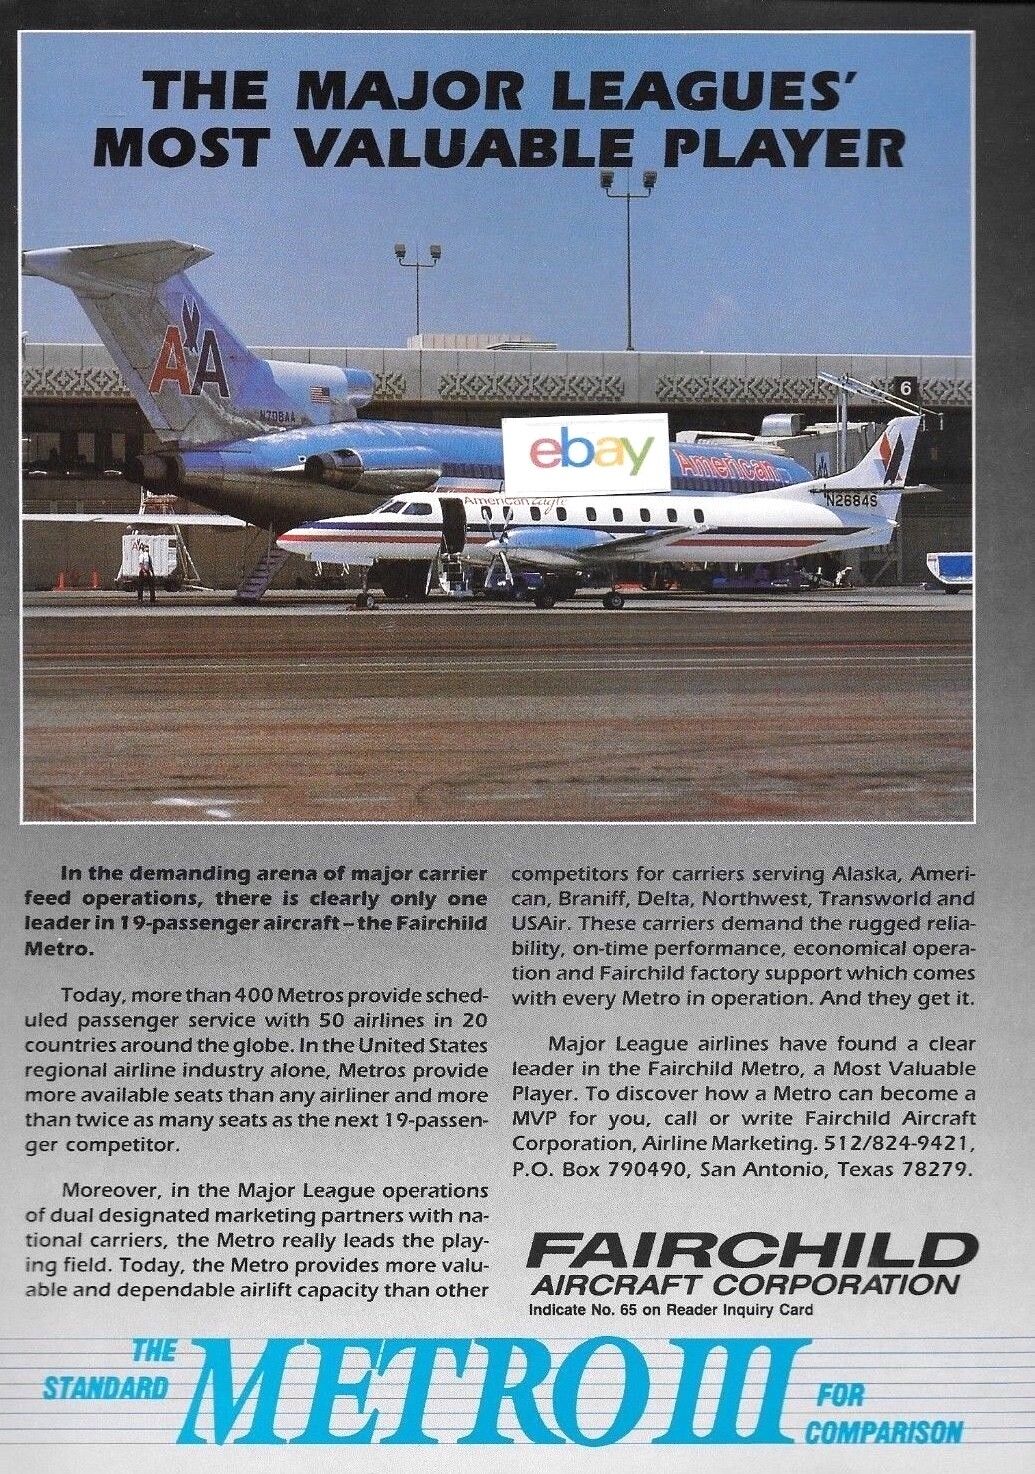 AMERICAN AIRLINES & EAGLE B727-200 & FAIRCHILD METROLINER AT PHX 1989 AD